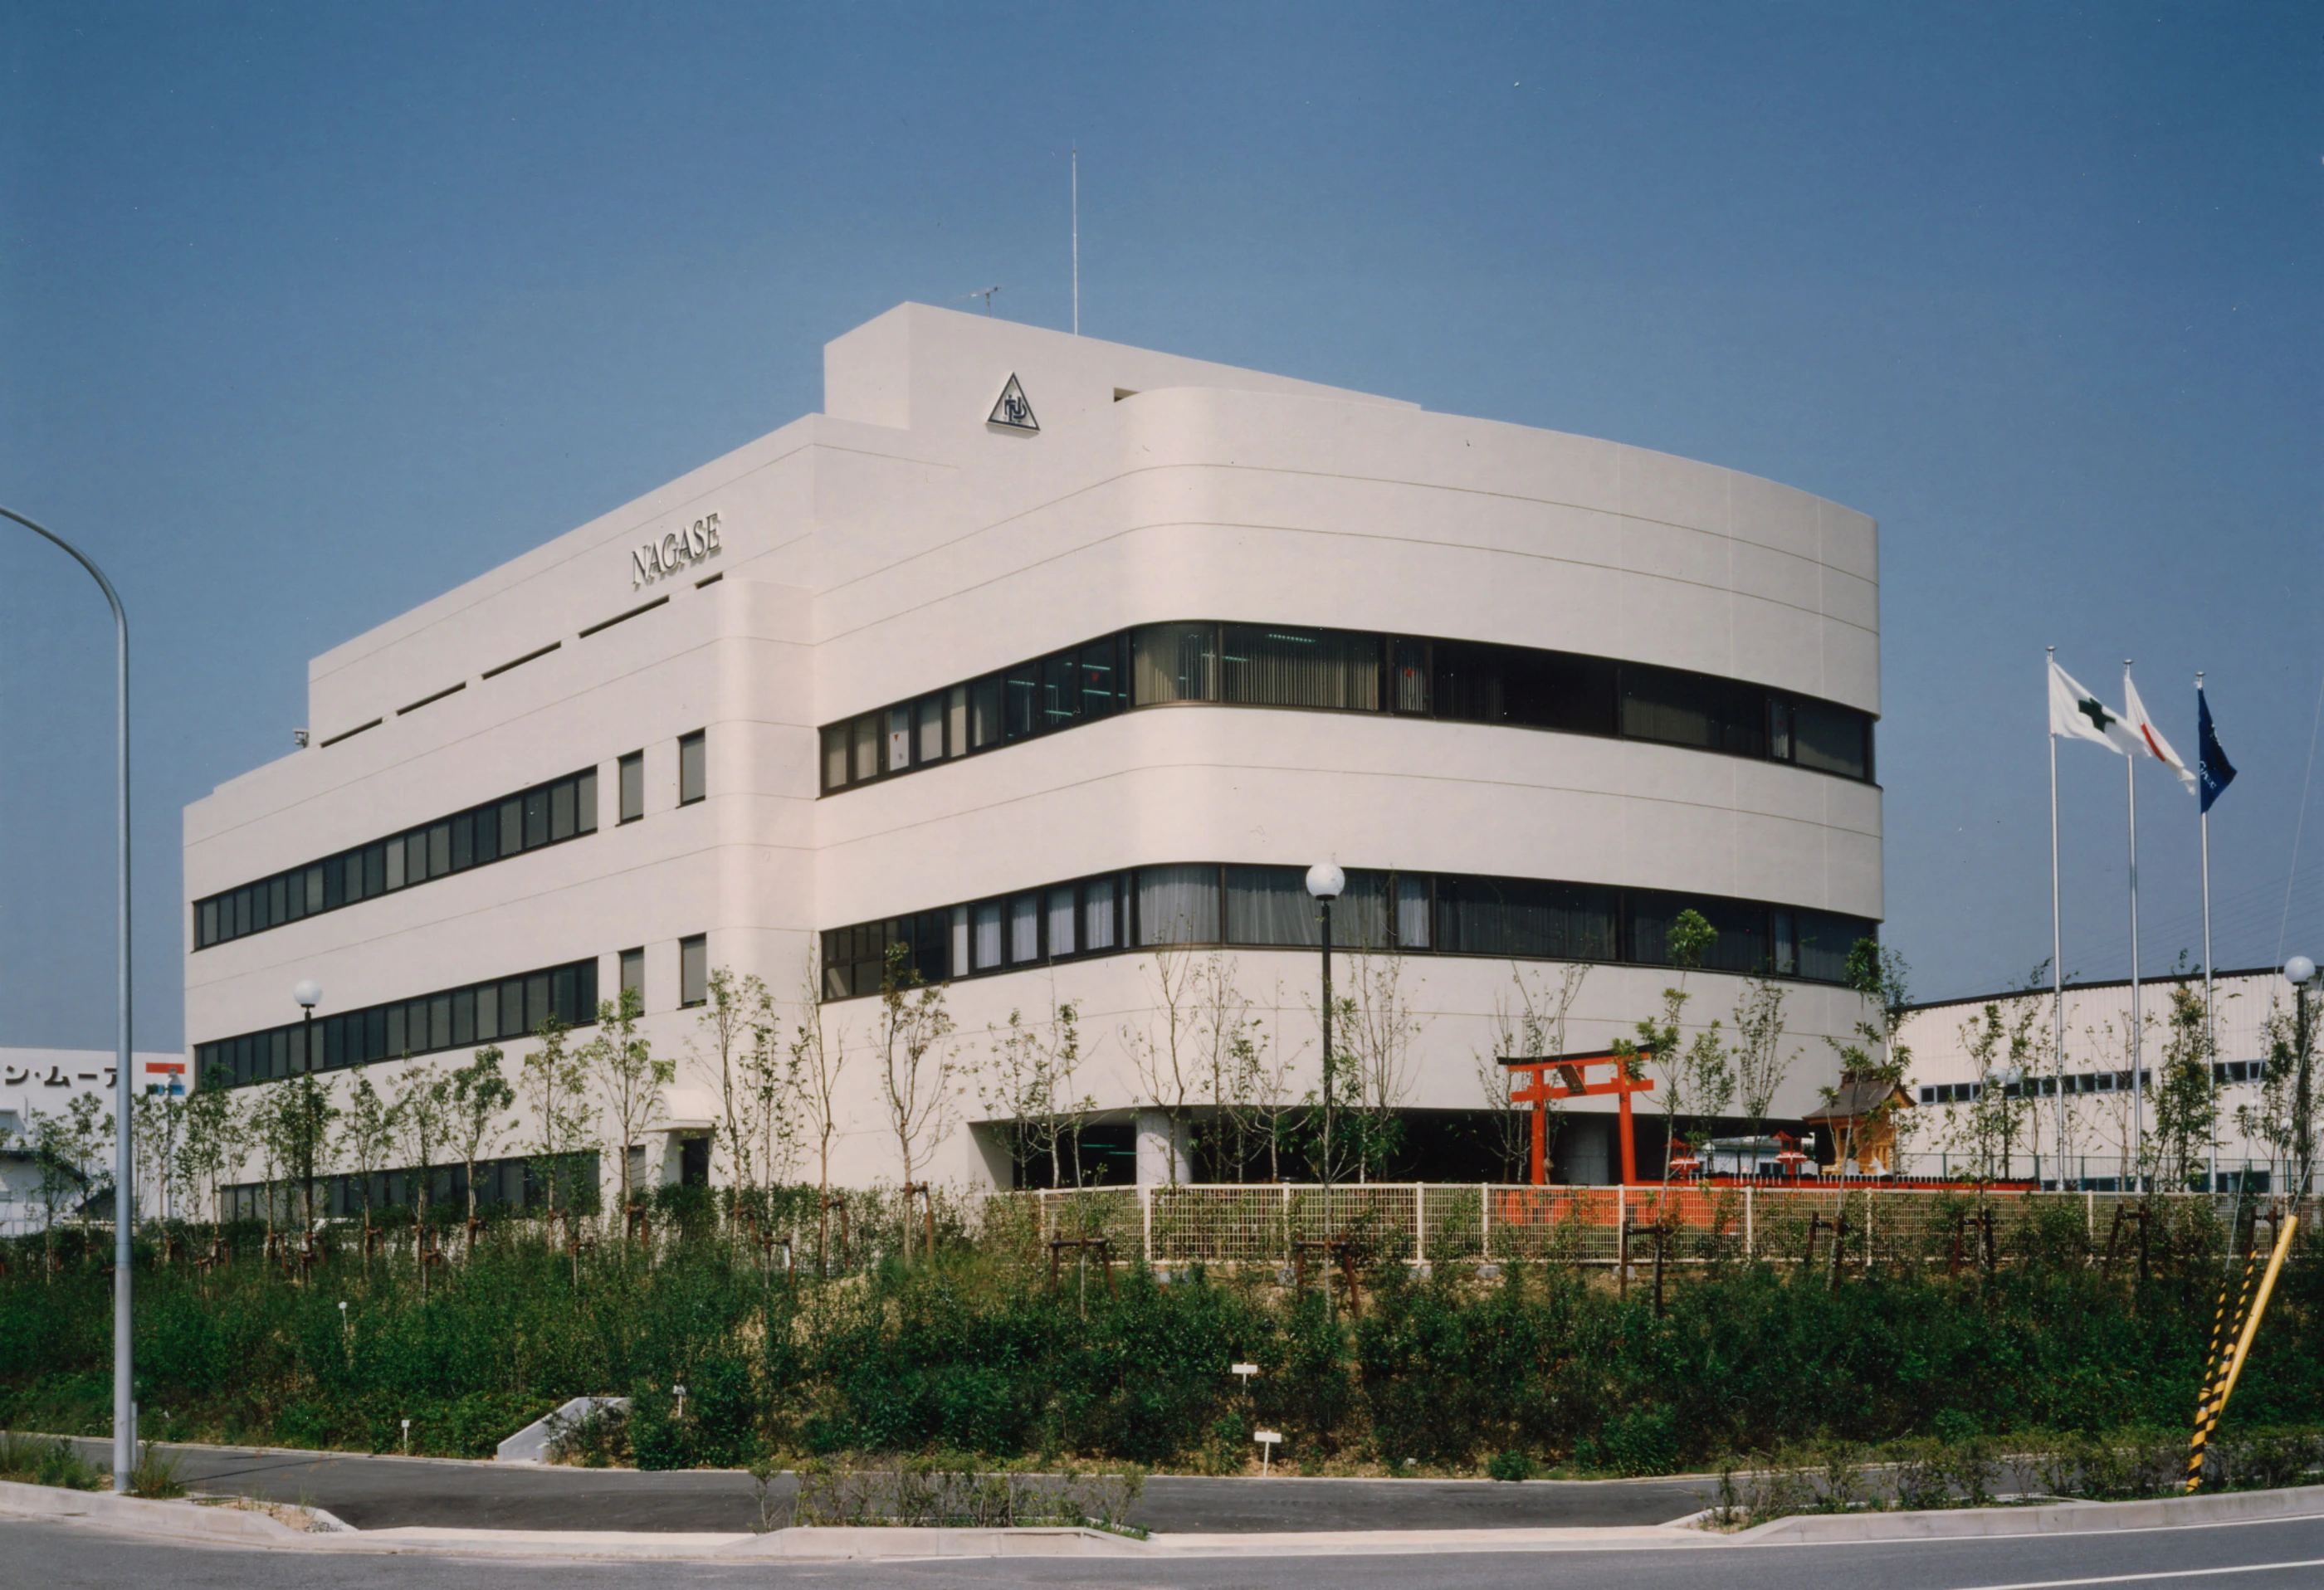 The completed Nagase R&D Center